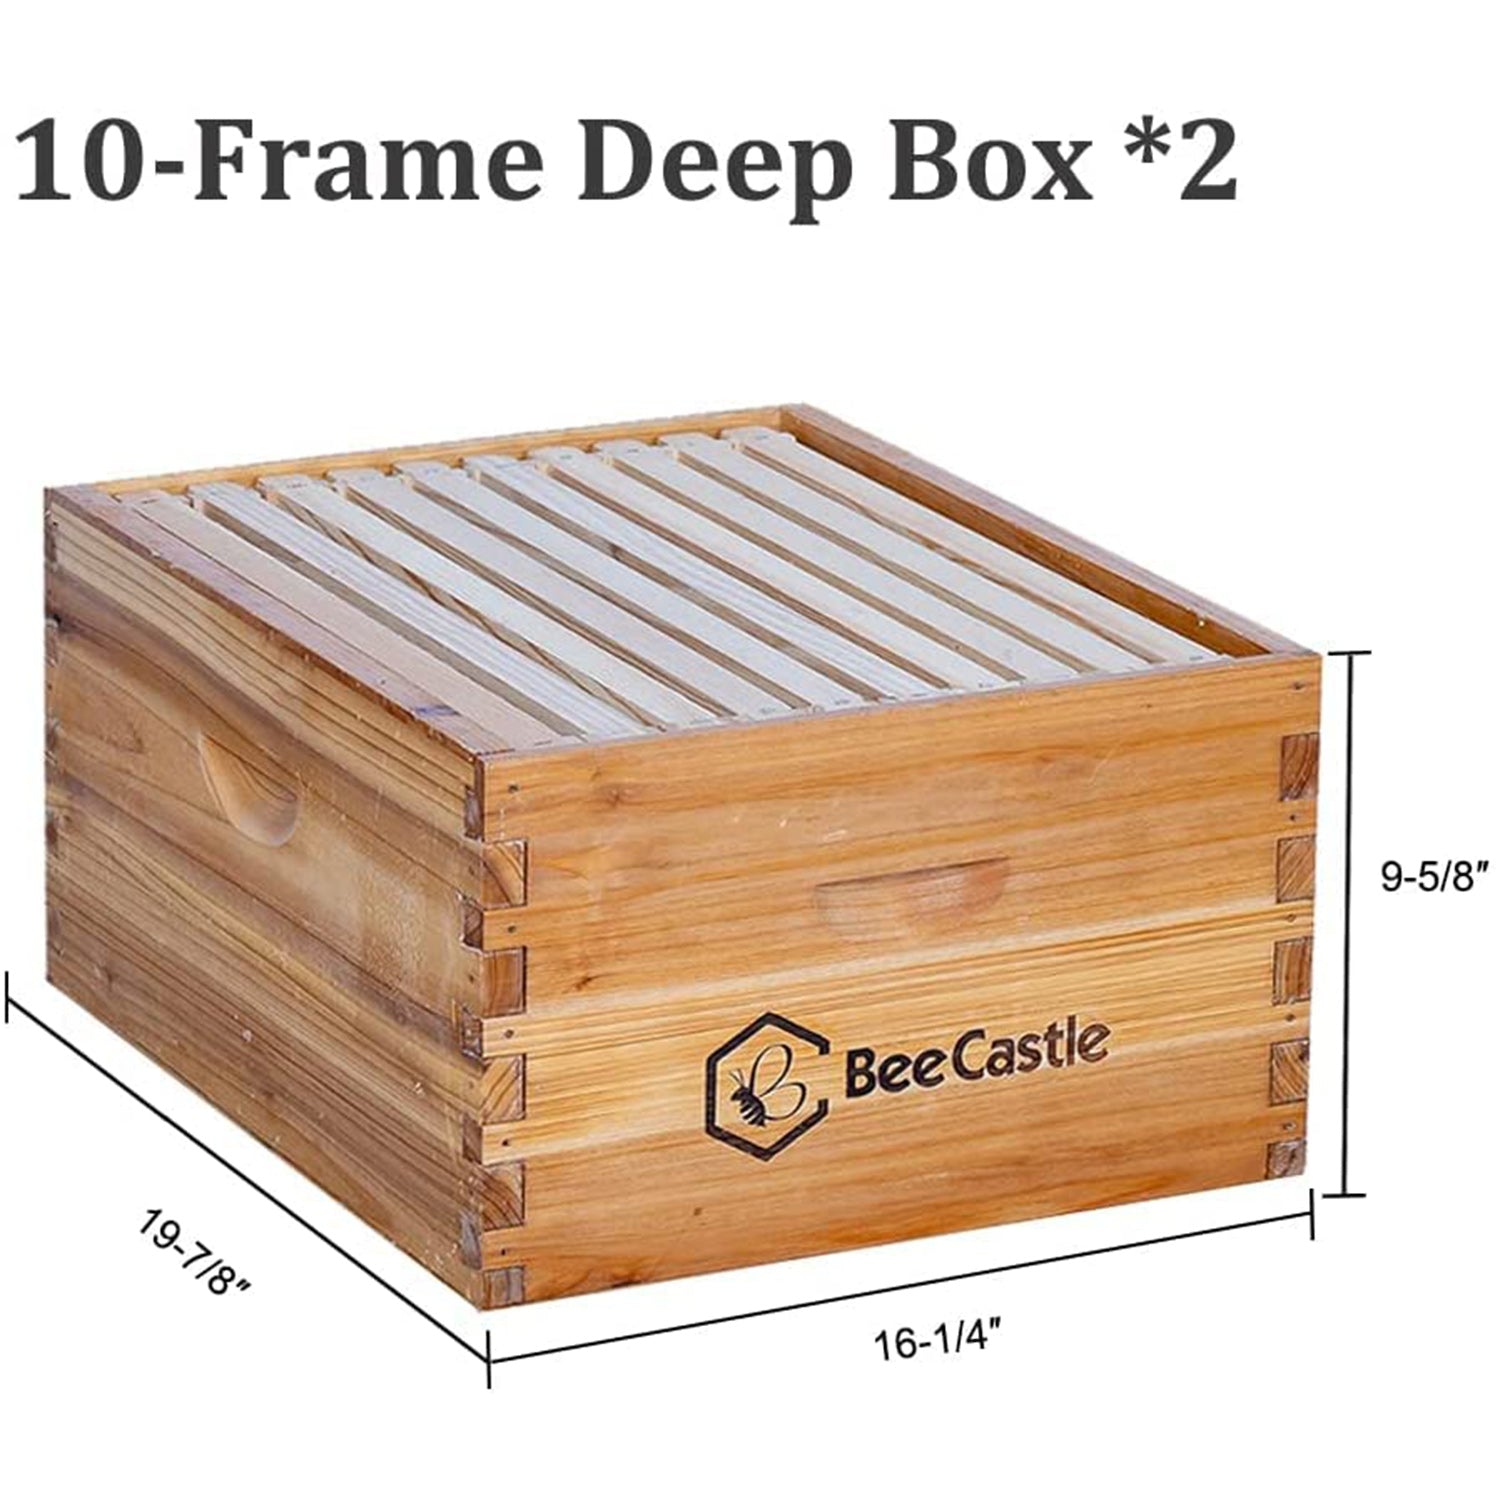 10-frame deep box: Deep boxes are typically used to hold the main frames of the hive, where bees store honey and royal jelly.